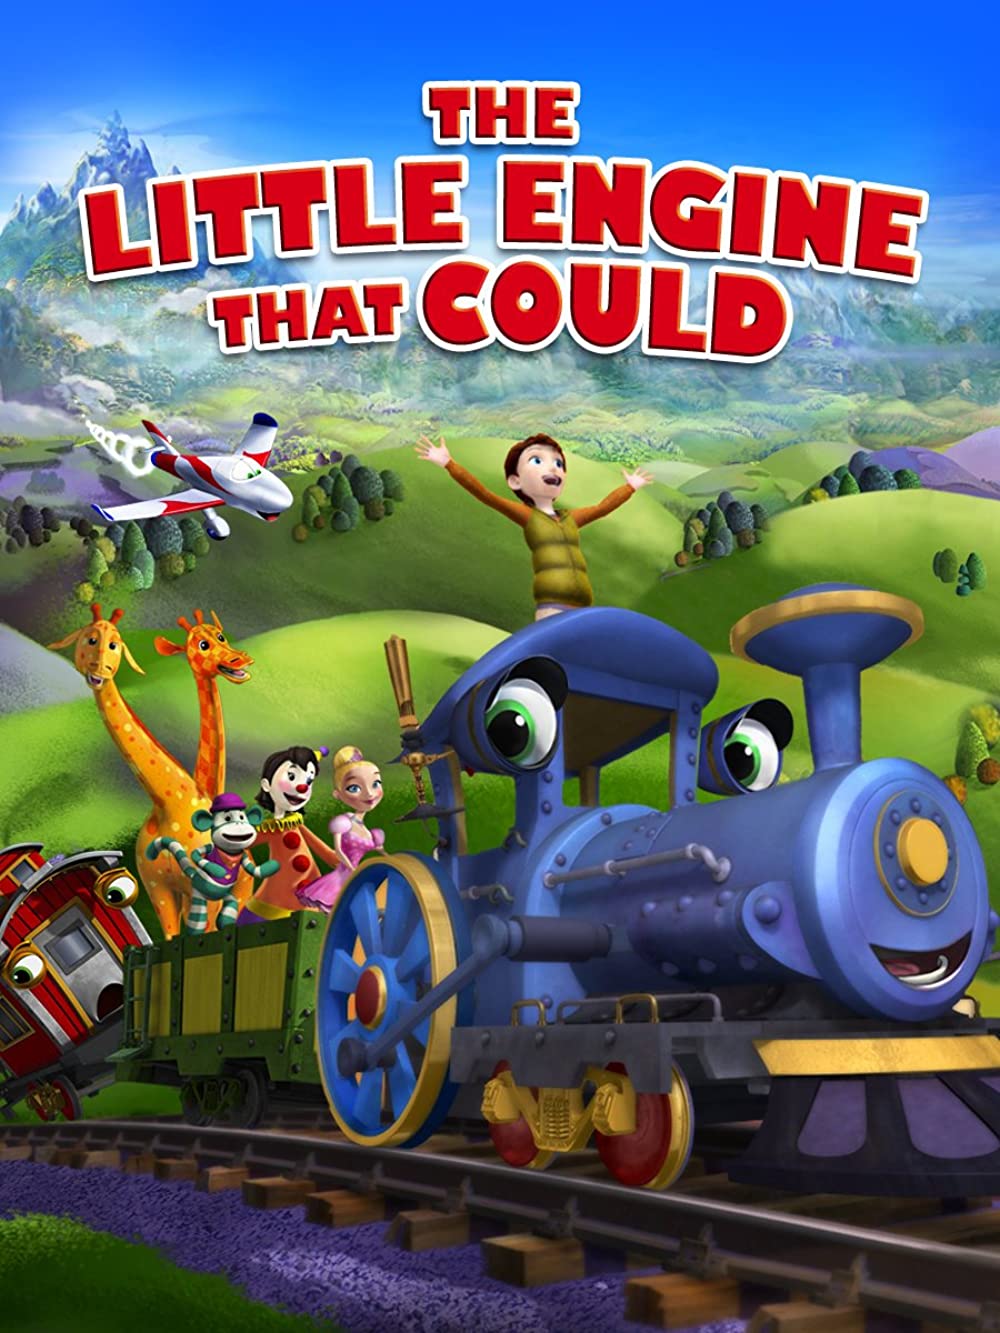 Download The Little Engine That Could Movie | The Little Engine That Could Movie Review